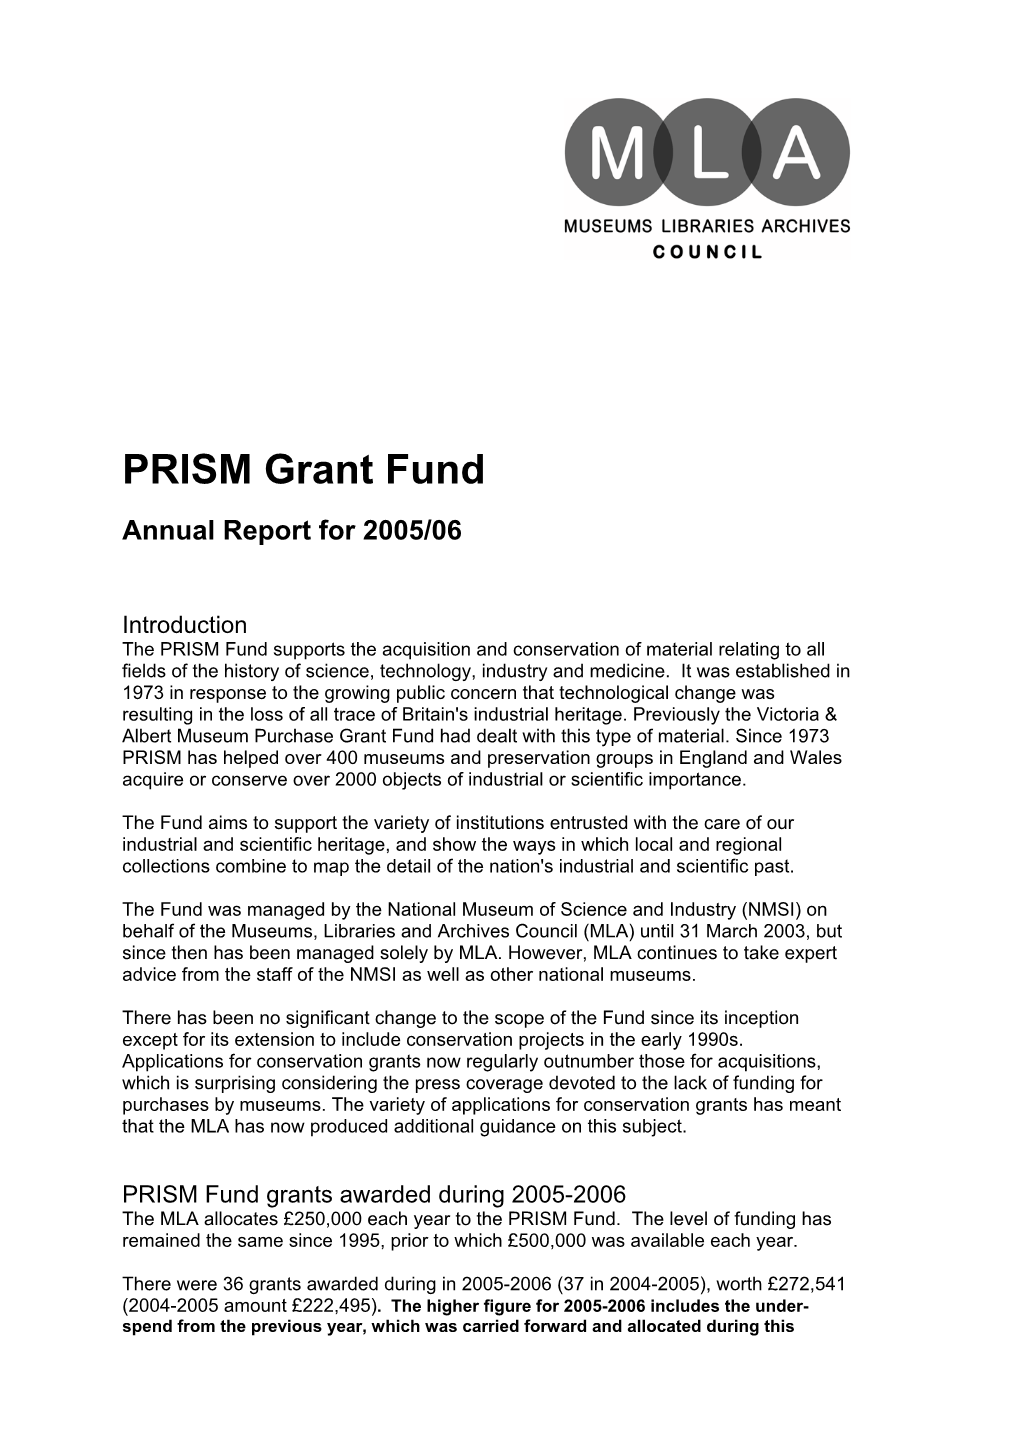 PRISM Grant Fund Annual Report for 2005/06